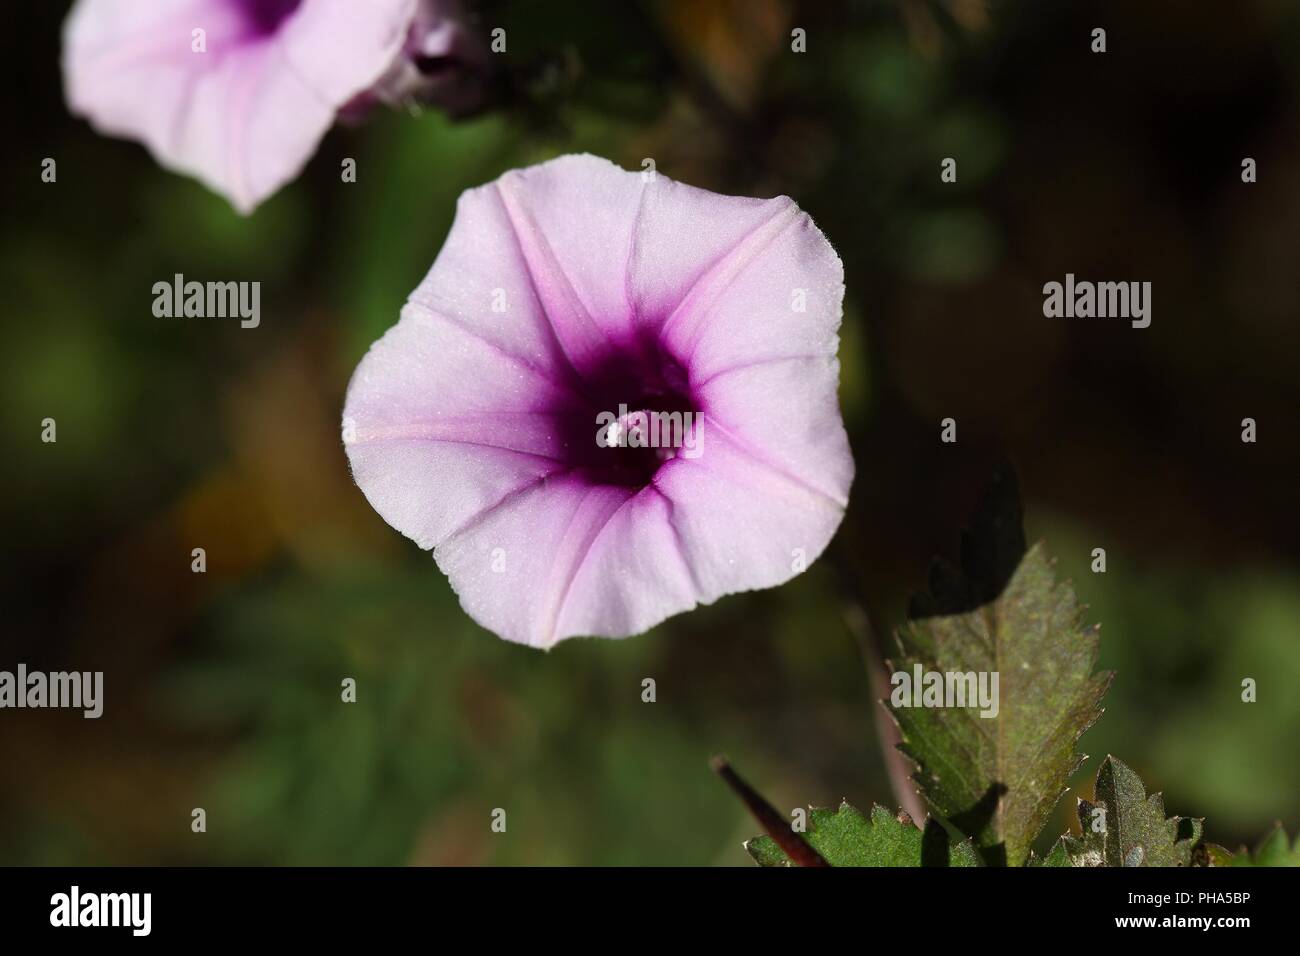 Flower of the morning glory Ipomoea jaegeri in Africa. Stock Photo